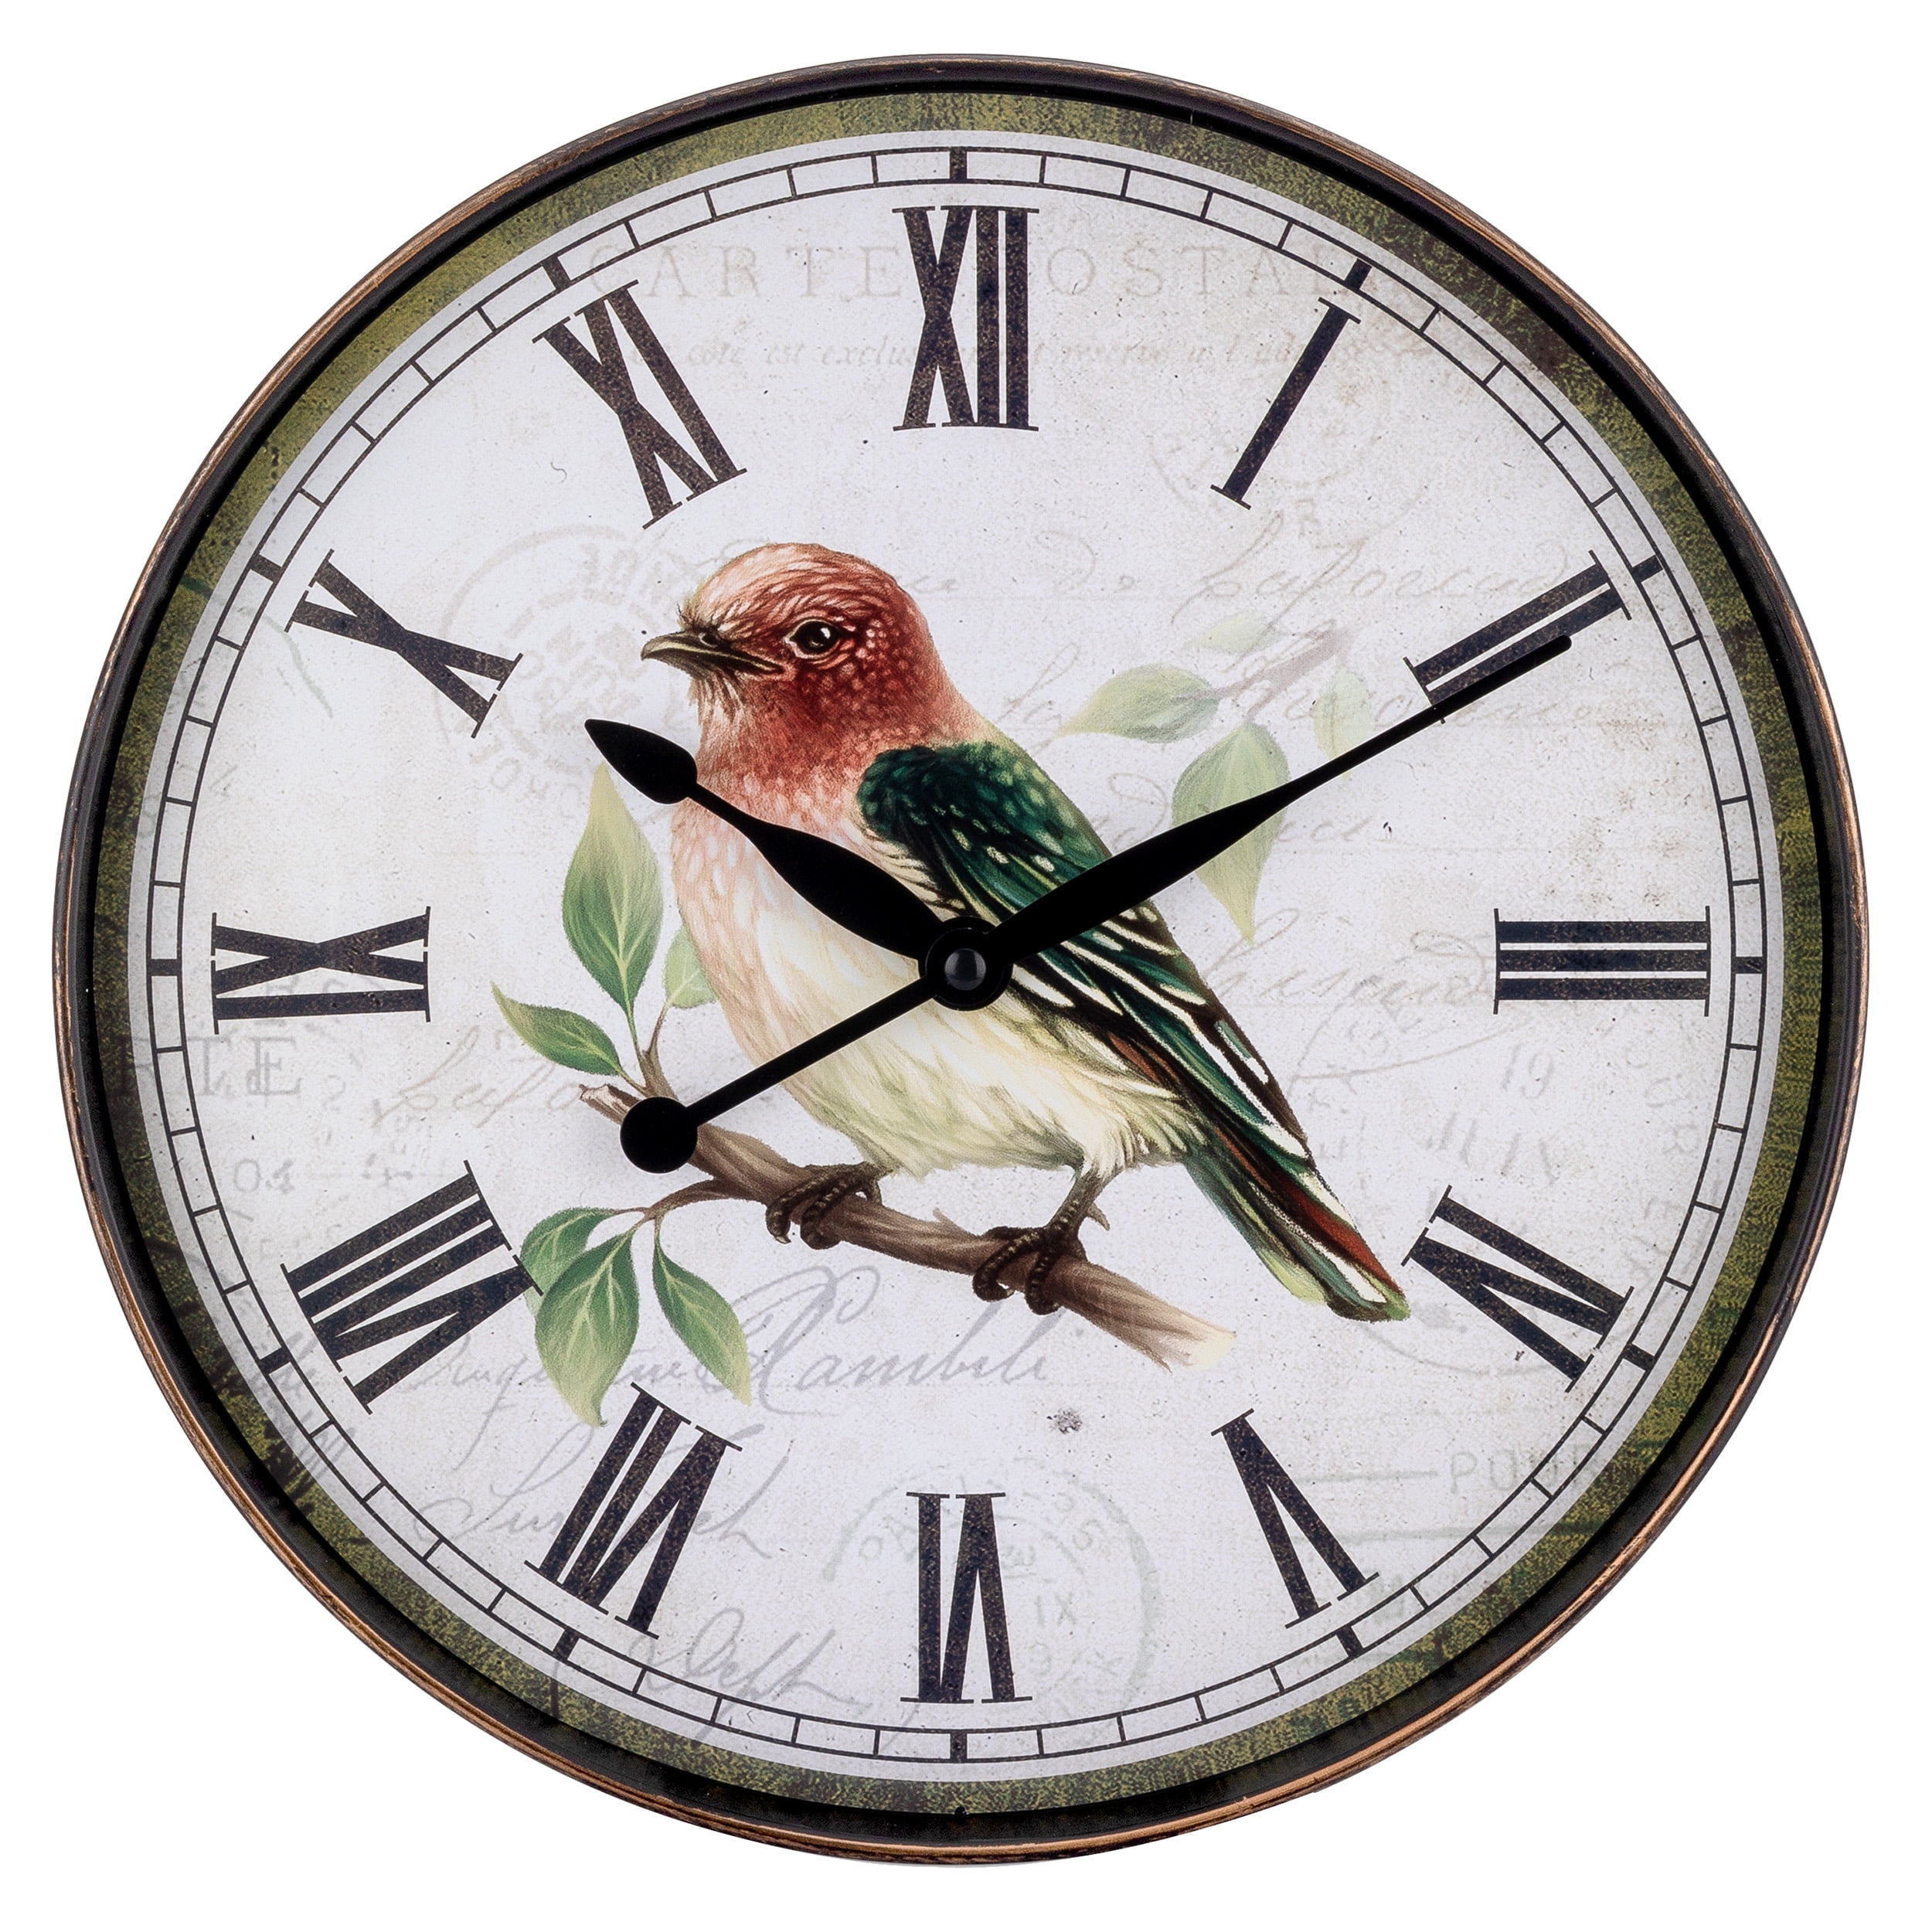 SINGING BIRDS WALL CLOCK 12 SONGS FOR EACH HOUR ANALOGUE NEW 